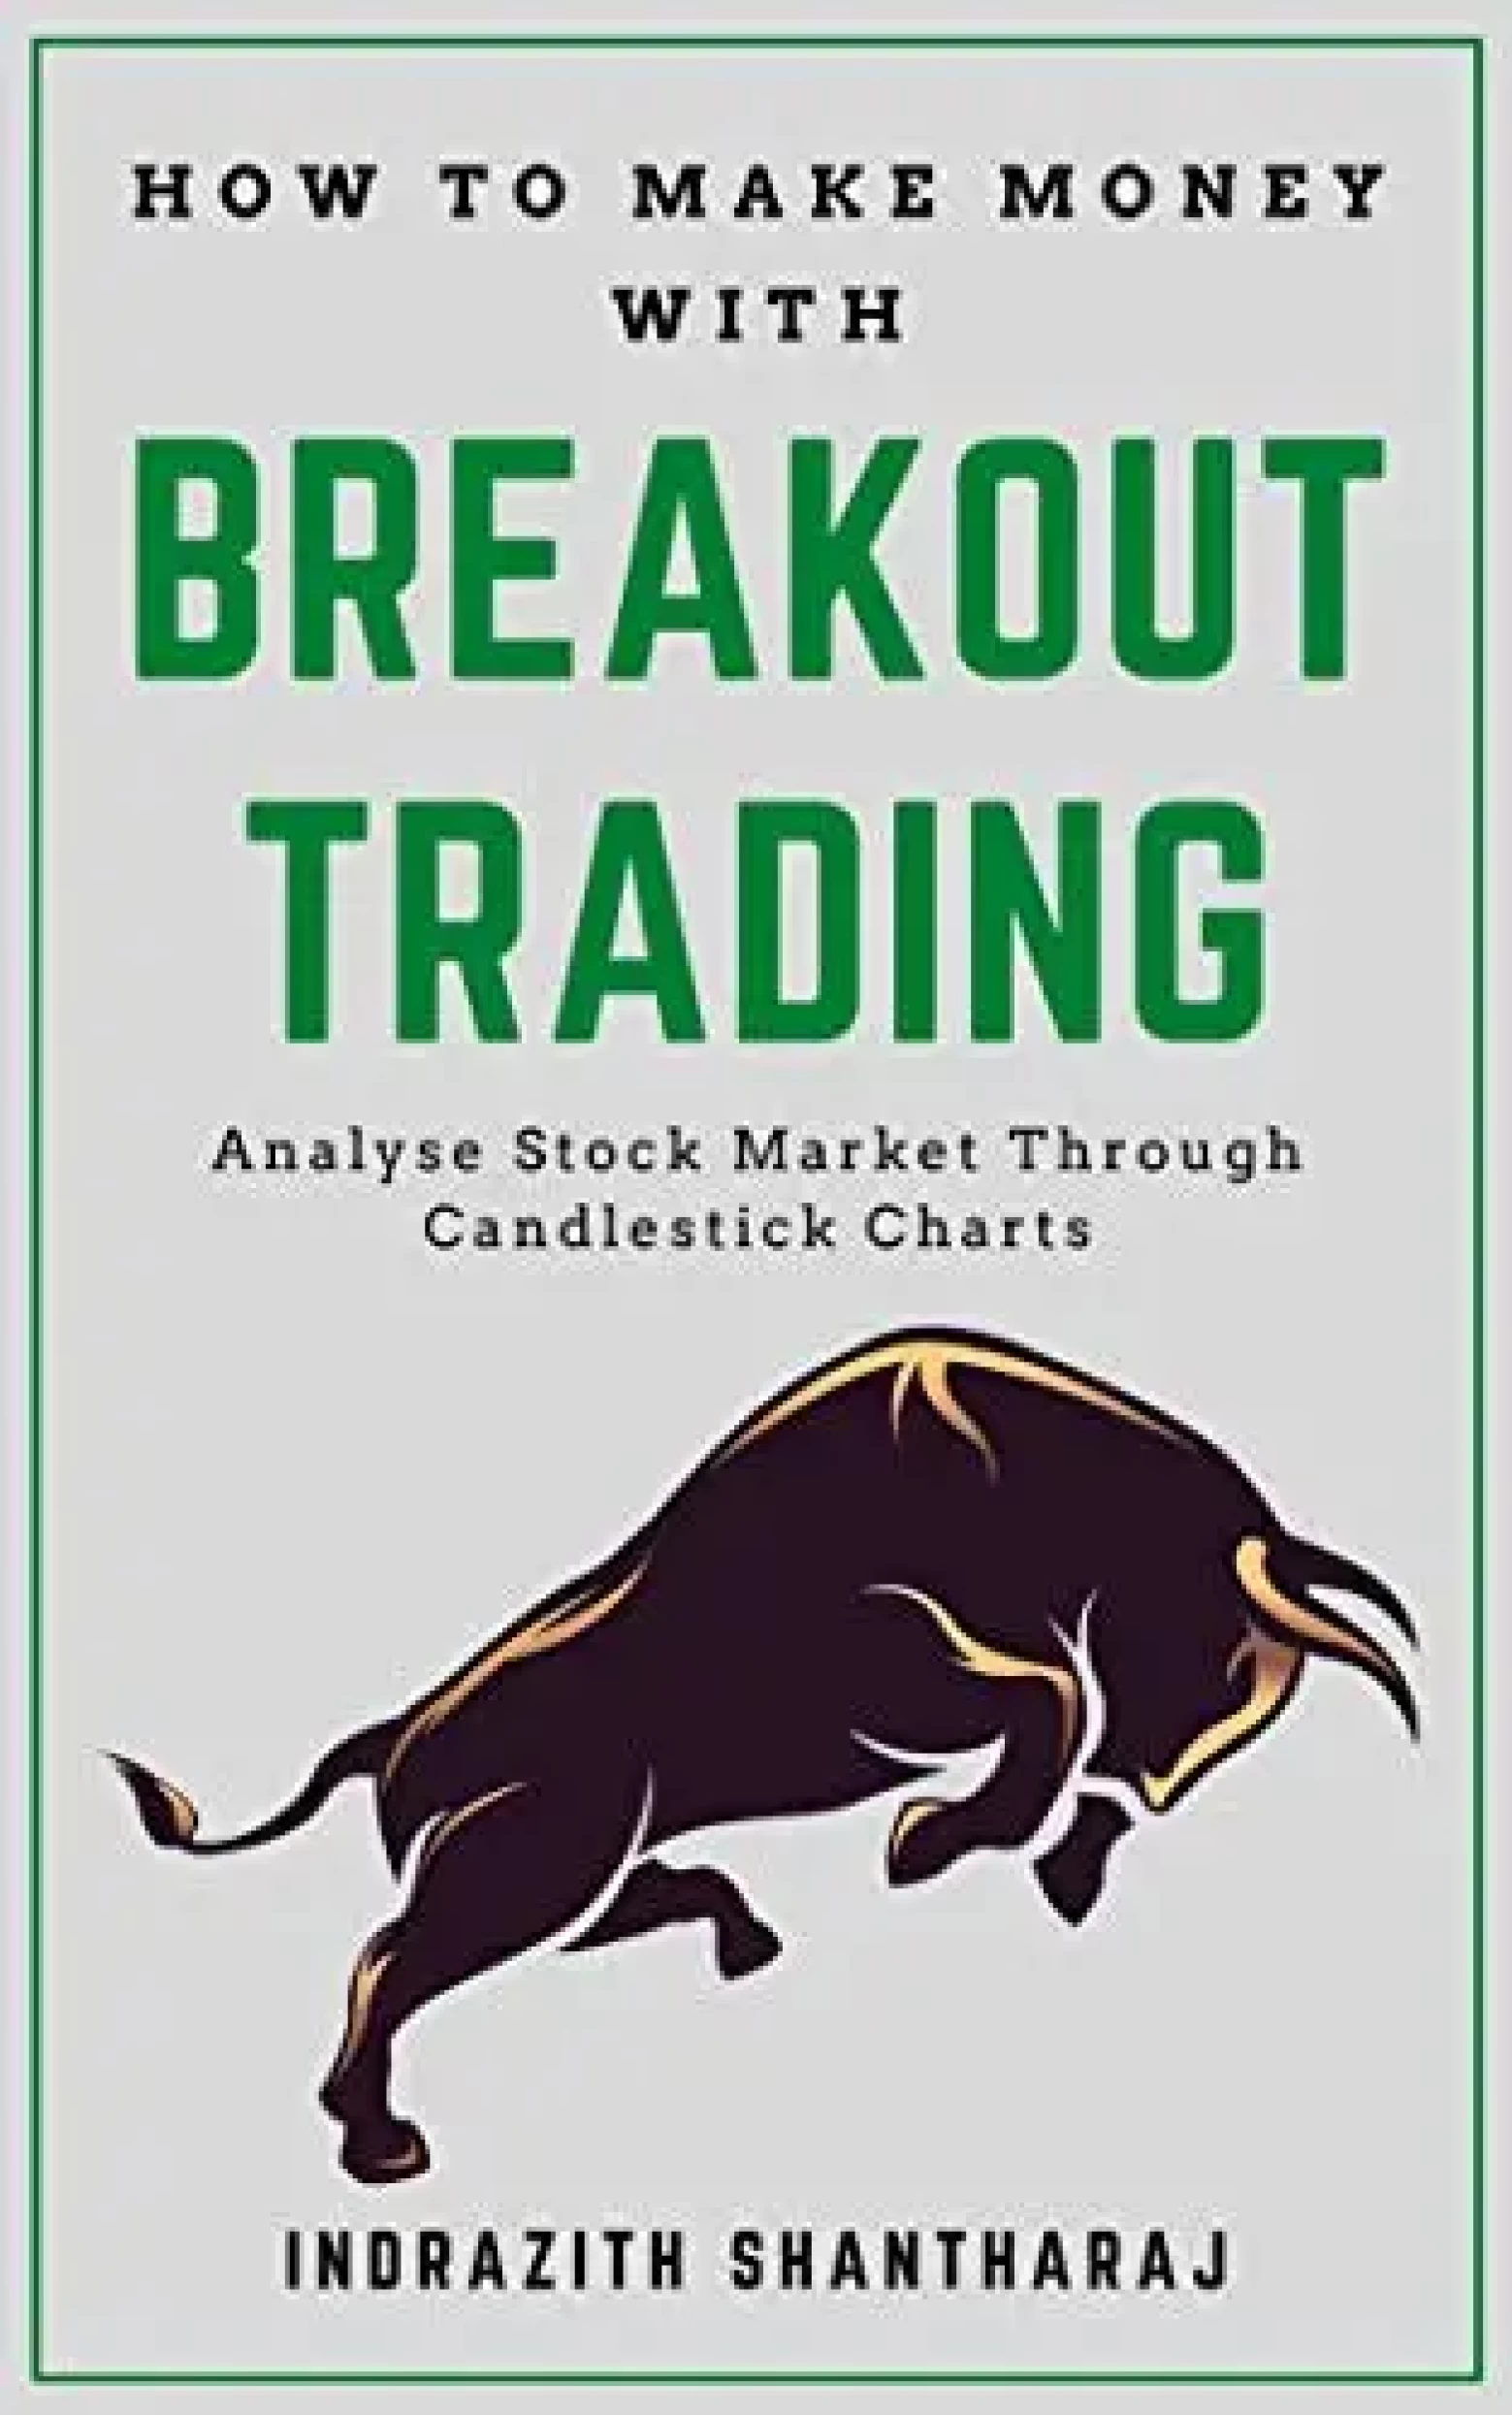 How to Make Money With Breakout Trading  - Indrazith Shantharaj